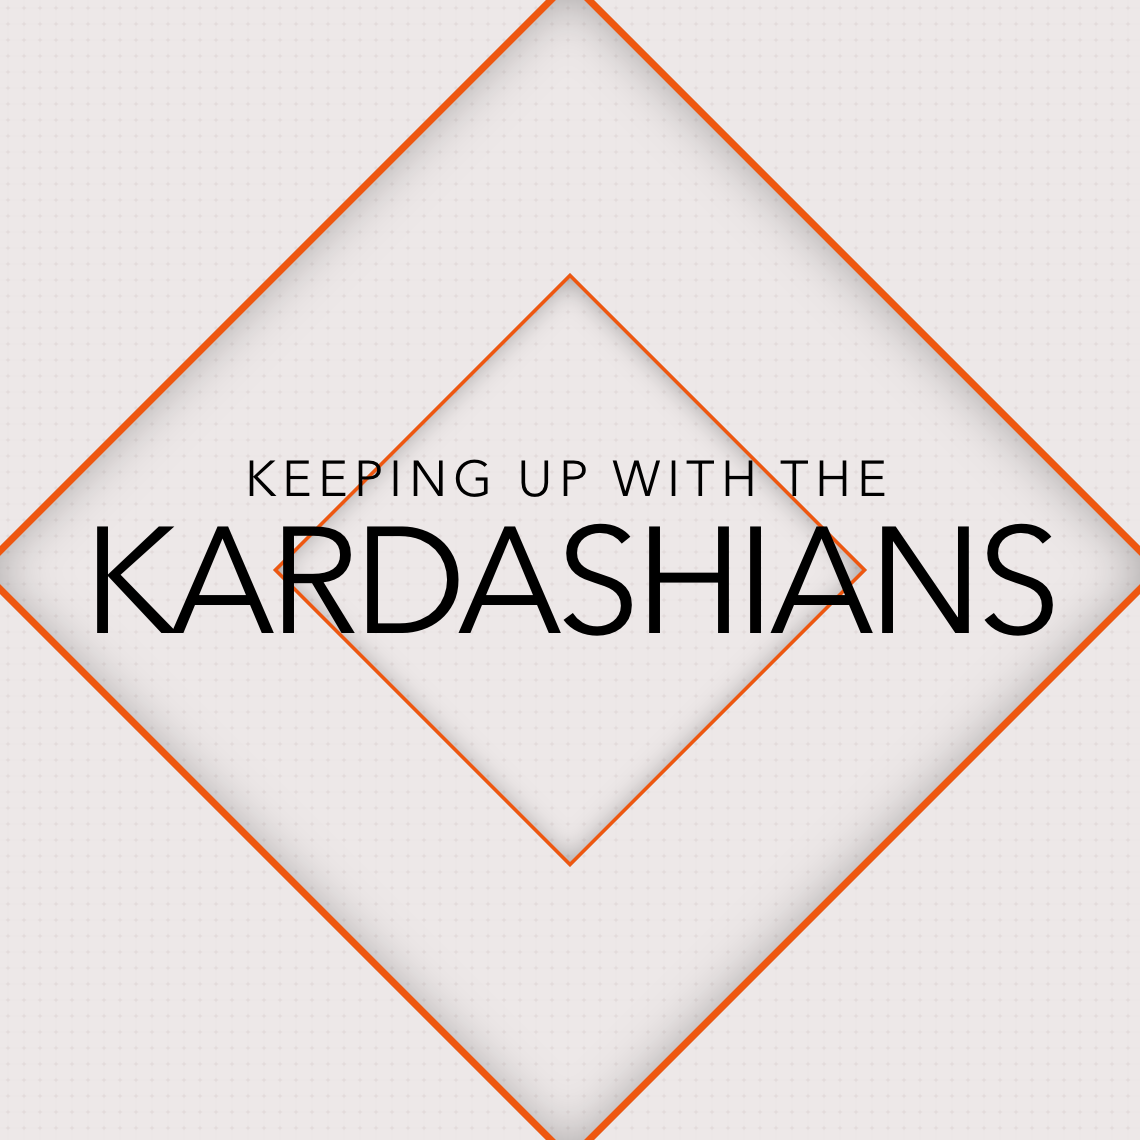 Keeping Up with the Kardashians: What is KUWTK?